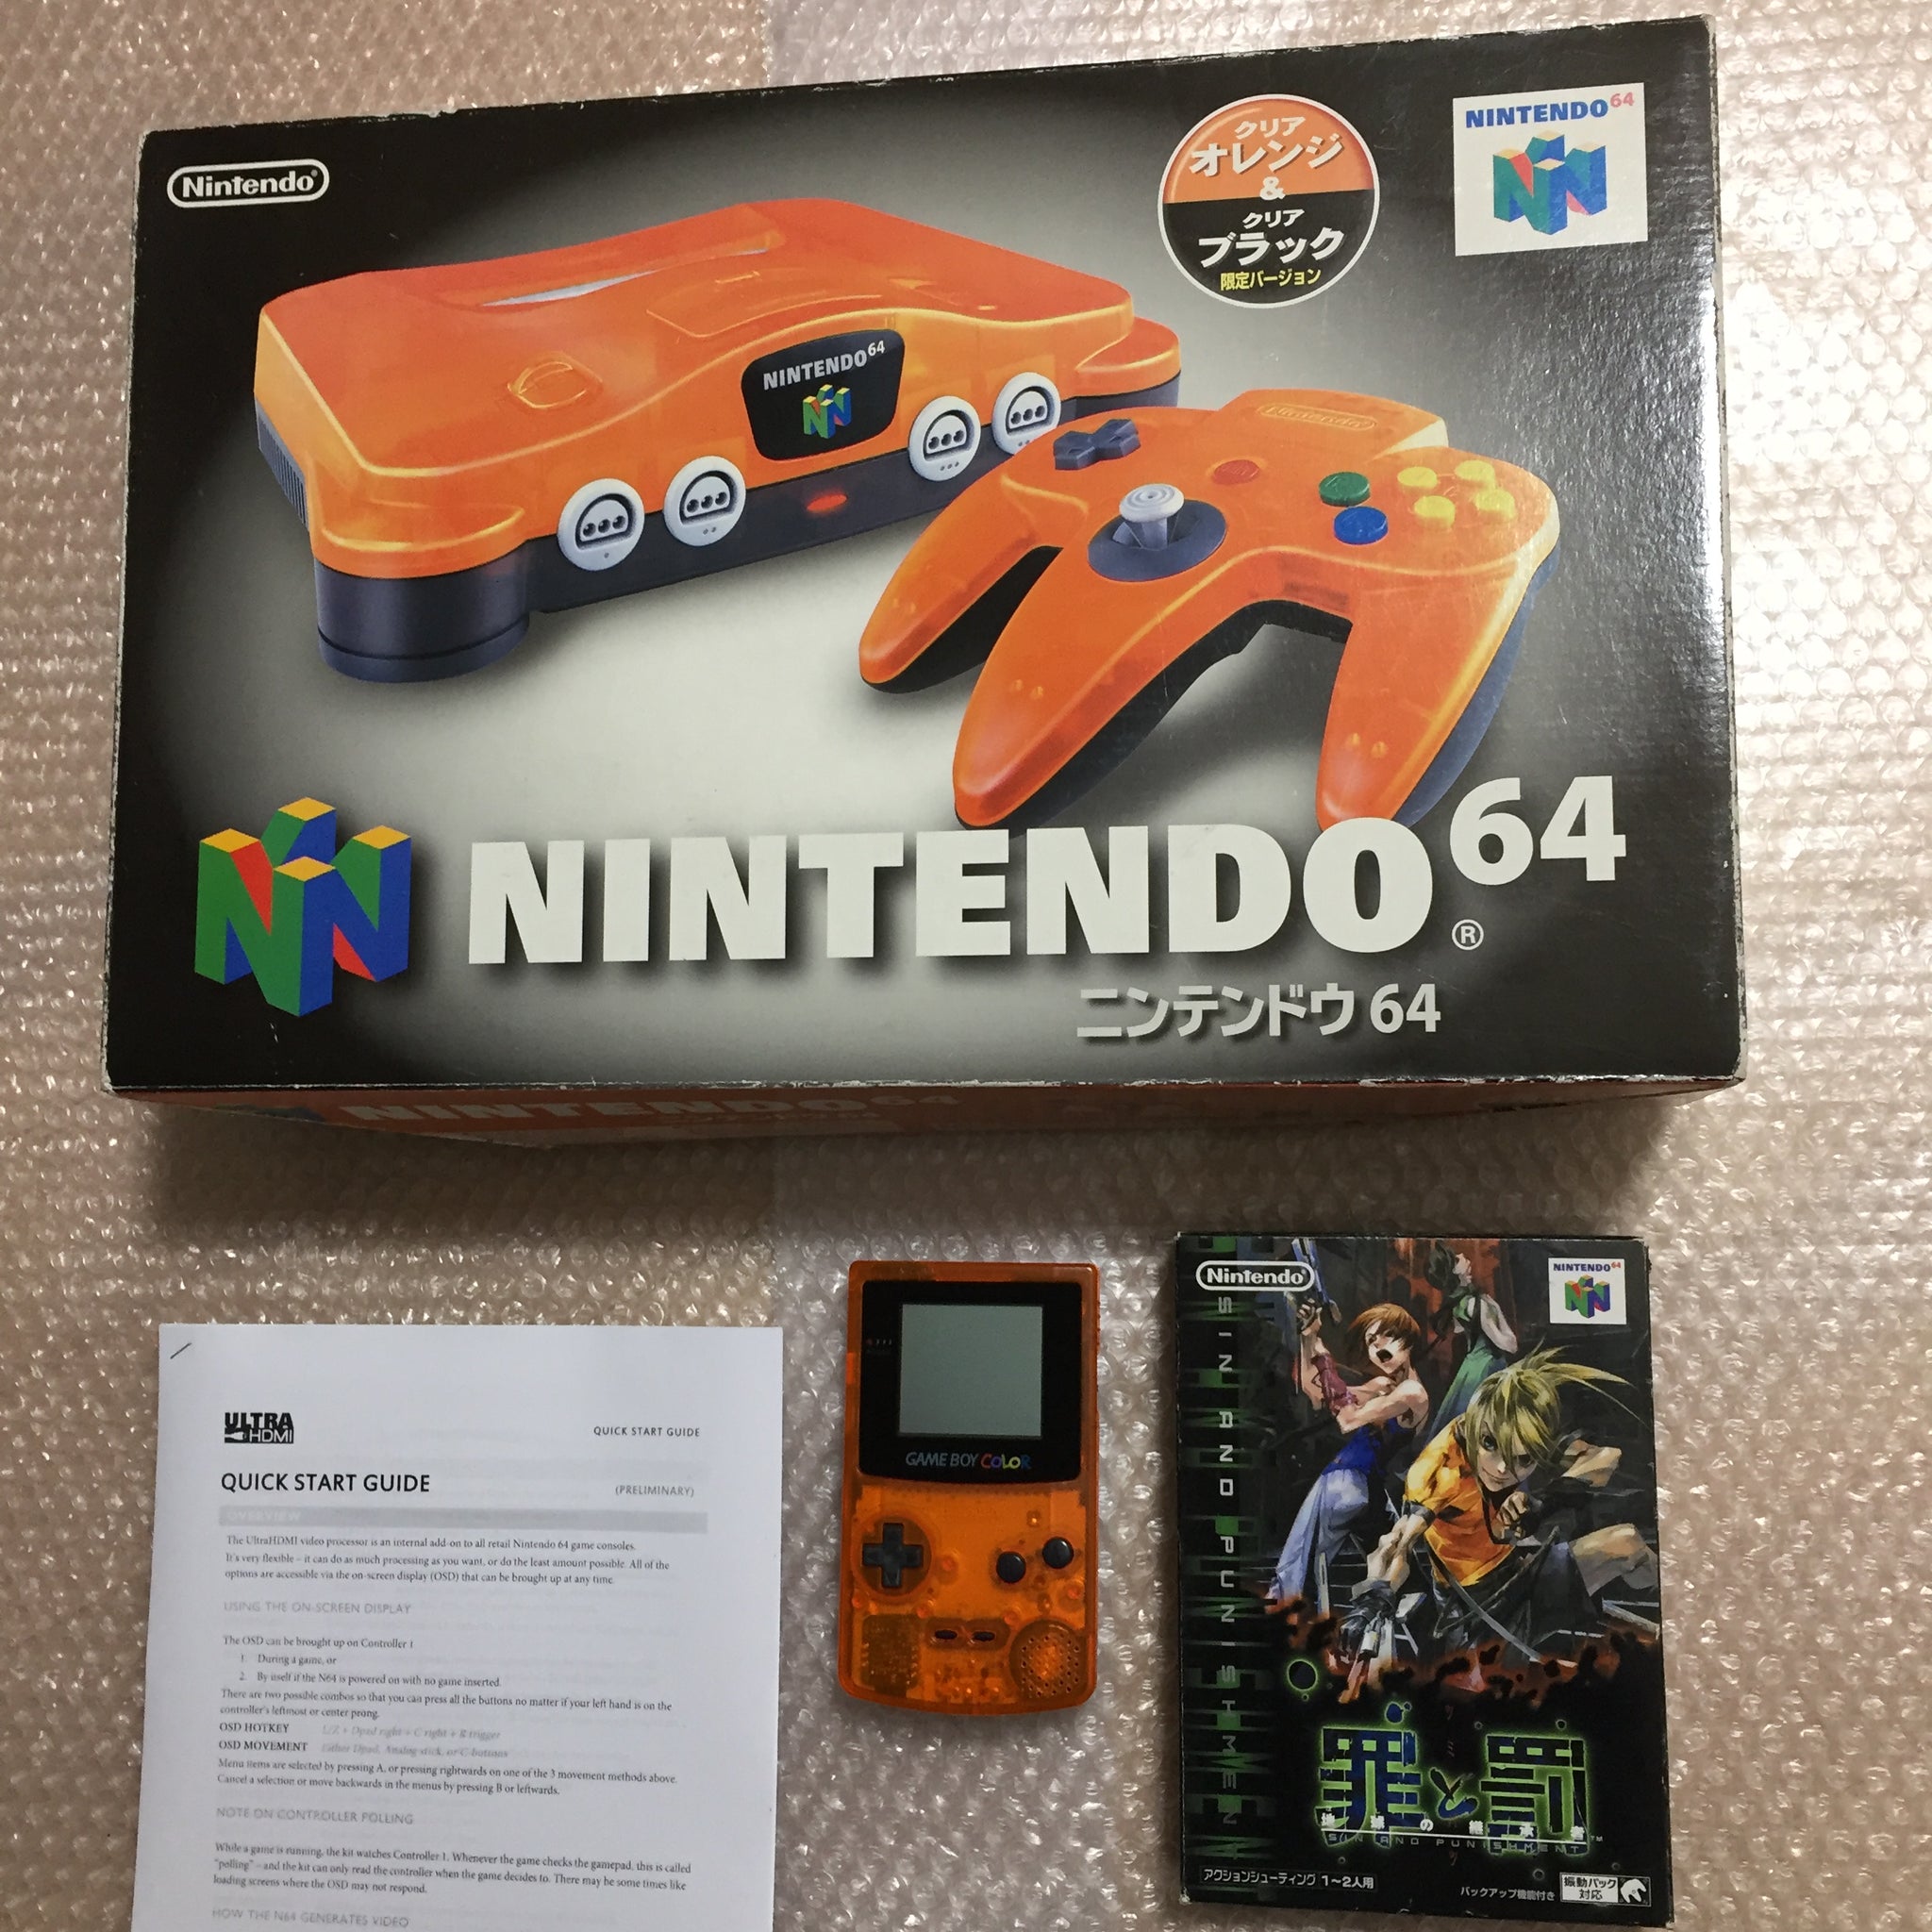 Daiei Hawks Nintendo 64 set with ULTRA HDMI kit - compatible with